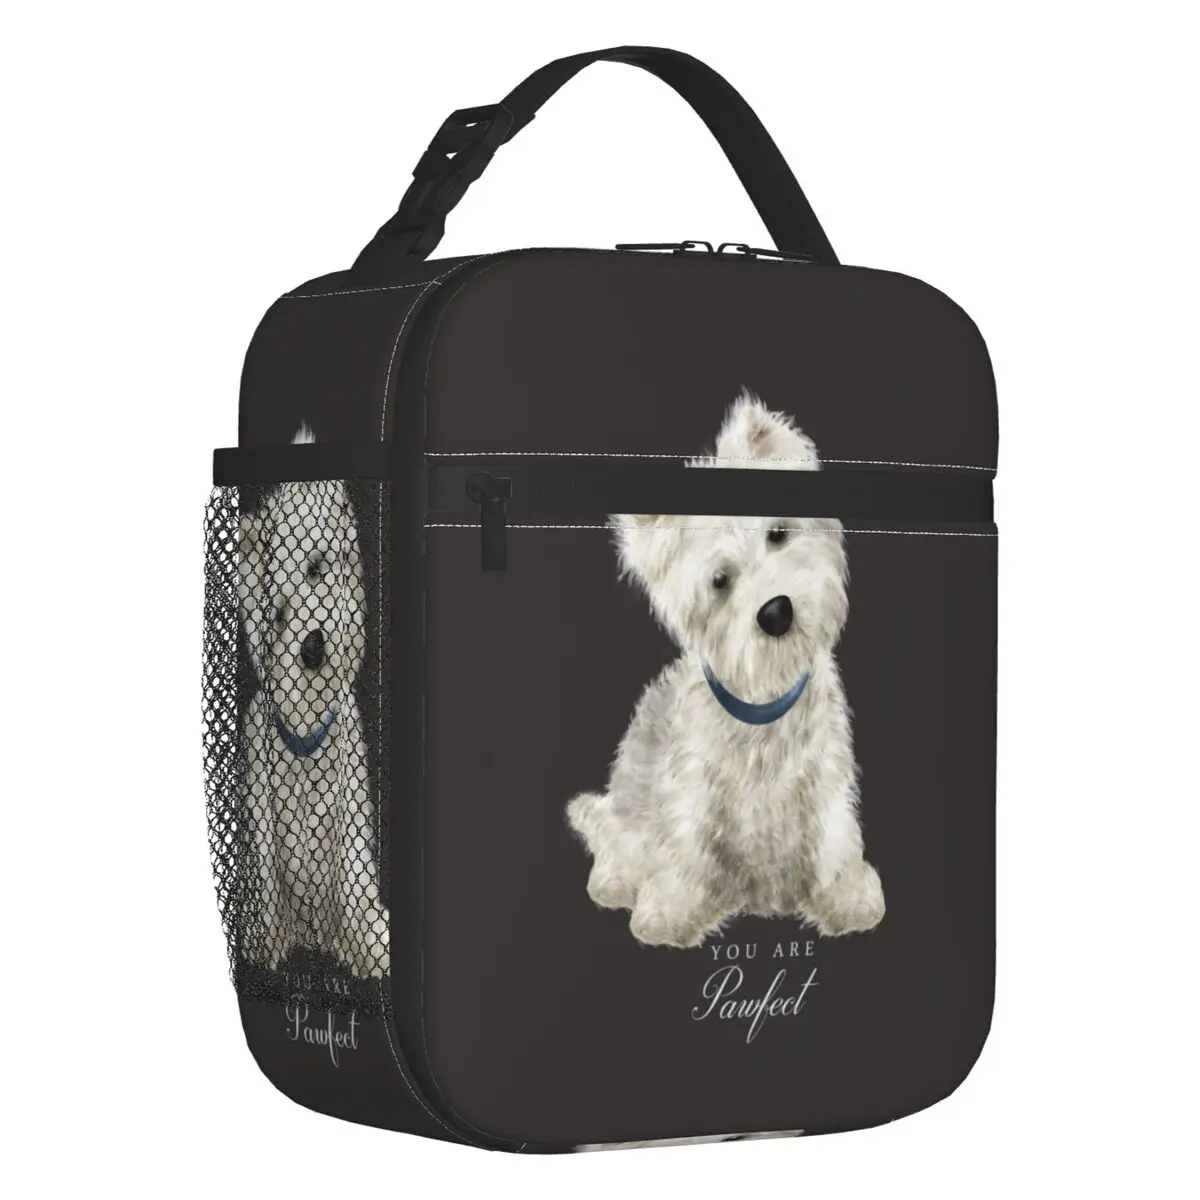 Westie West Highland White Terrier Dog Insulated Lunch Bags for Women Resuable Cooler Thermal Bento Box Work School Travel